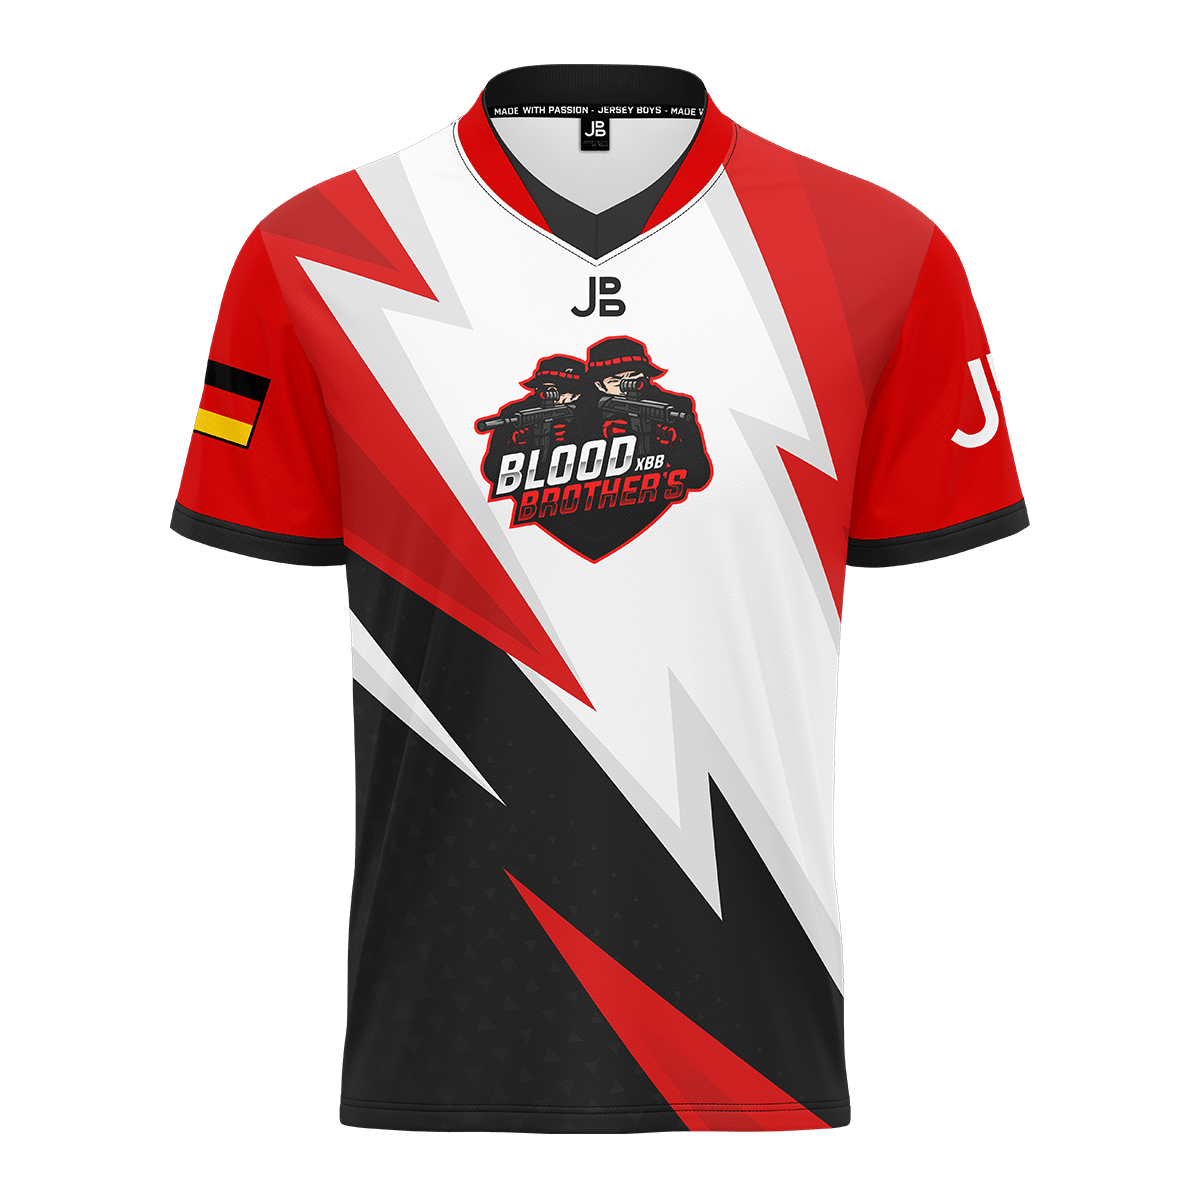 BLOODBROTHER'S - Jersey 2021